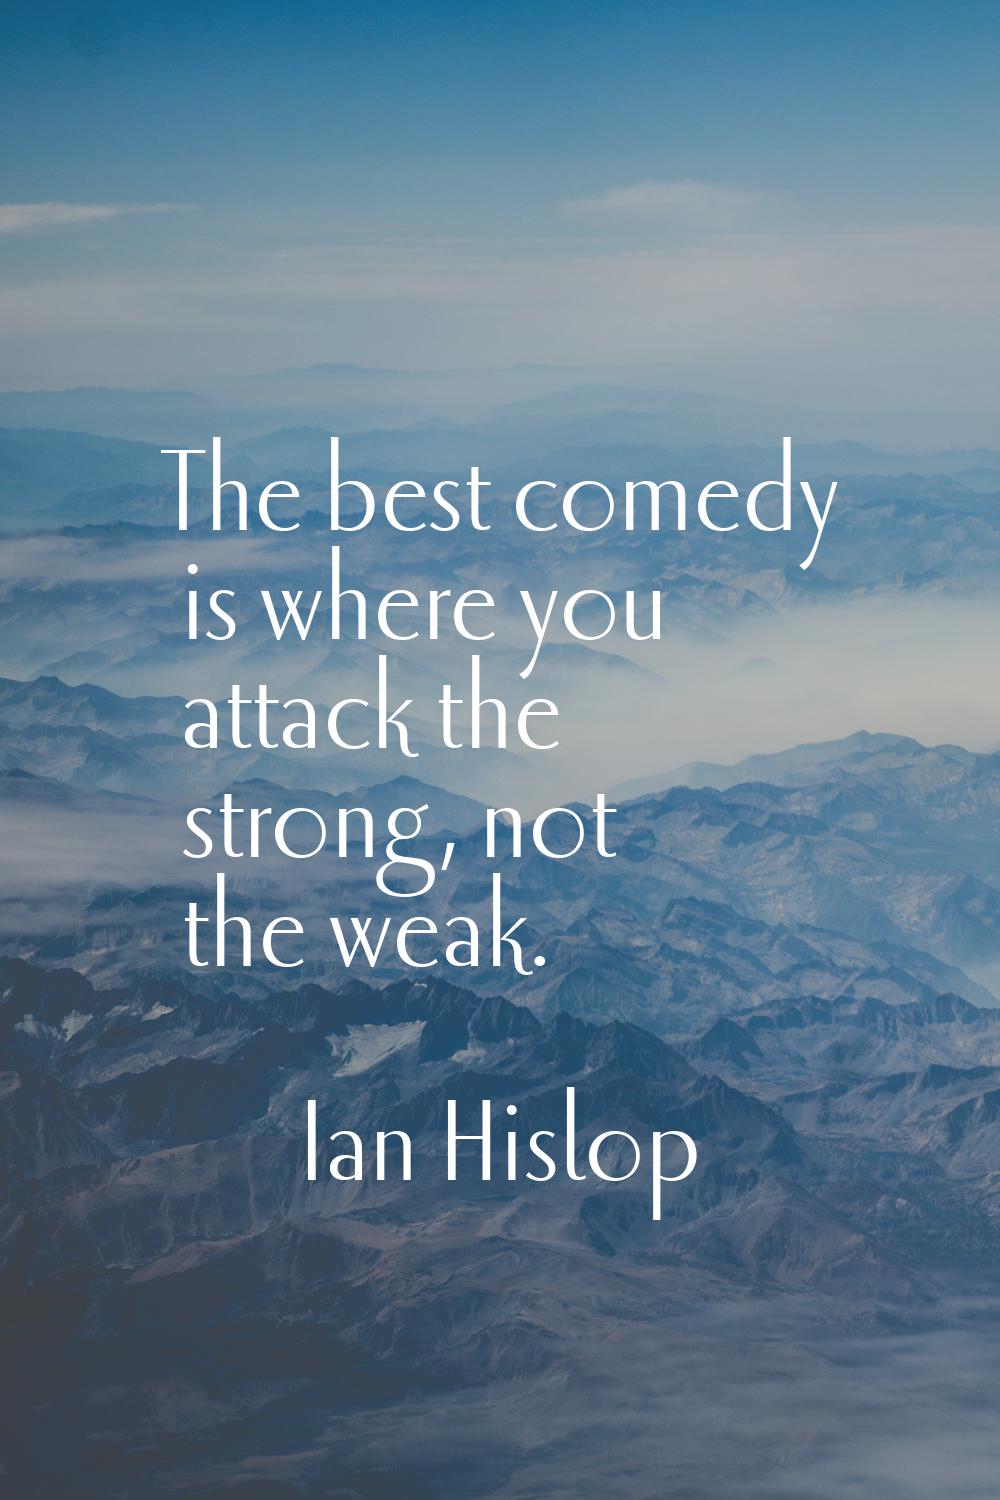 The best comedy is where you attack the strong, not the weak.